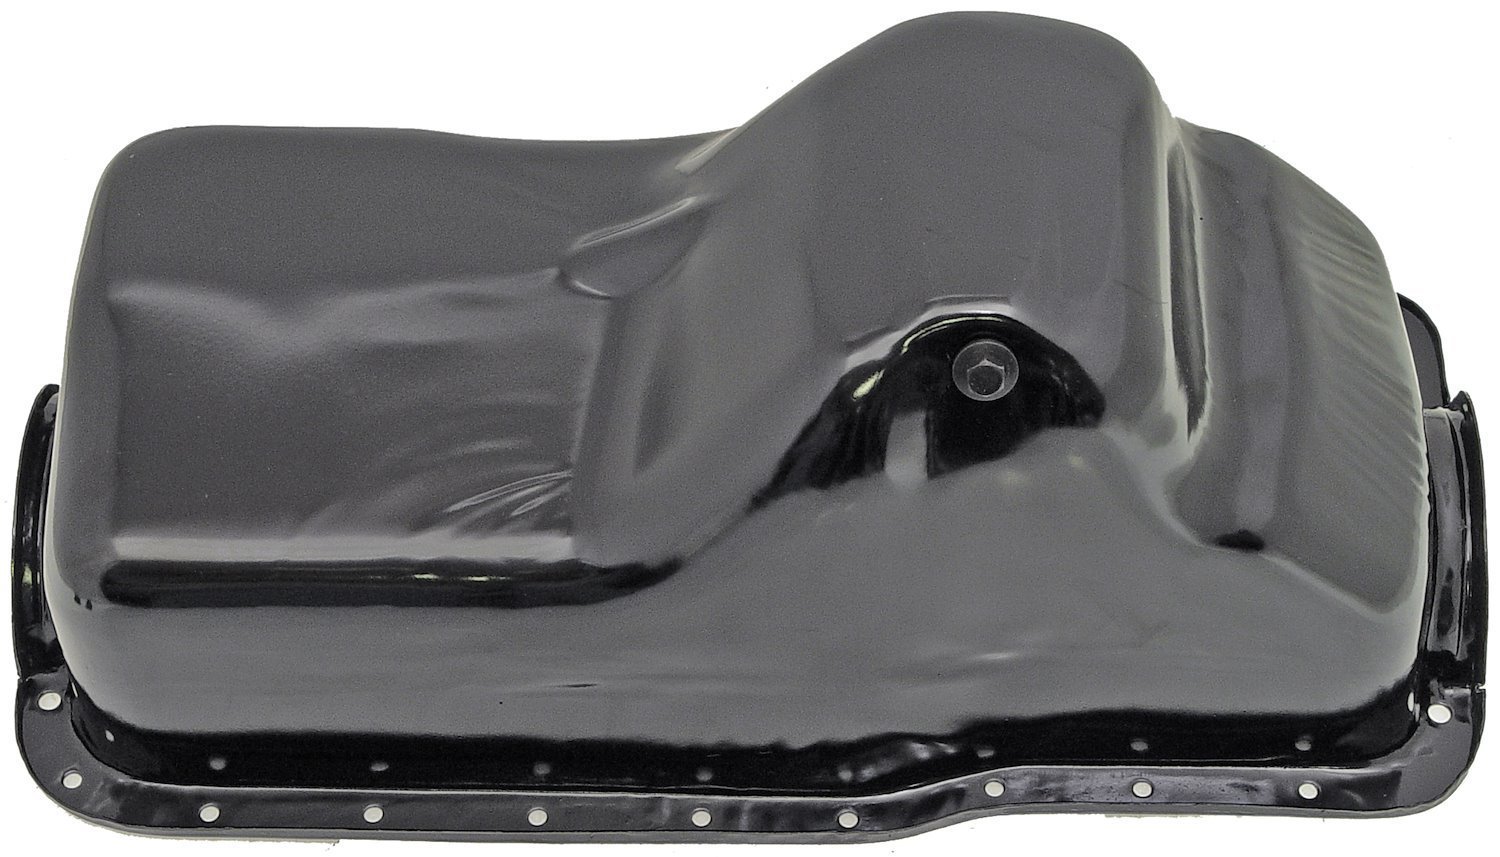 Stock-Style Replacement Oil Pan Fits Select 1980-1998 Ford Bronco, E-Series Vans, F-Series Trucks w/5.0L 302 Engine [Black]